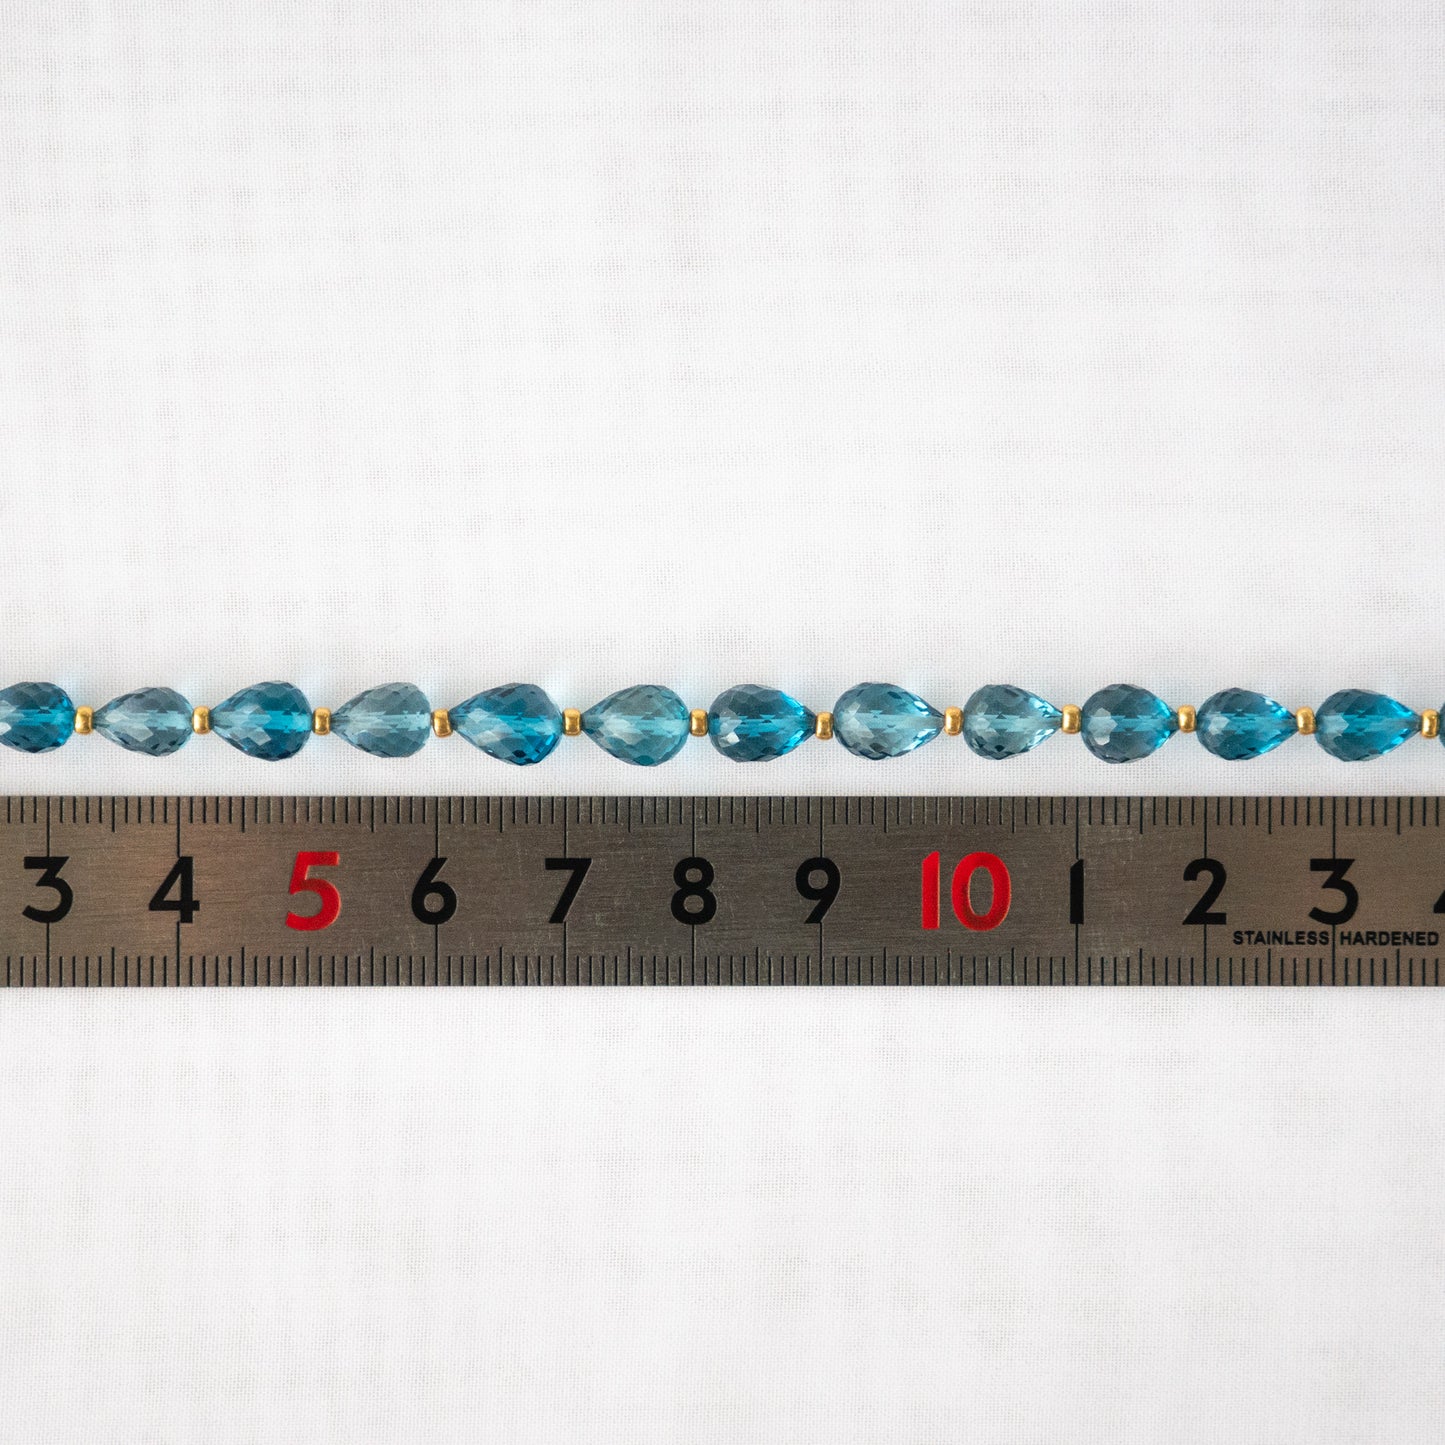 London Blue Topaz Micro Faceted Tear Drop Beads 1Strand